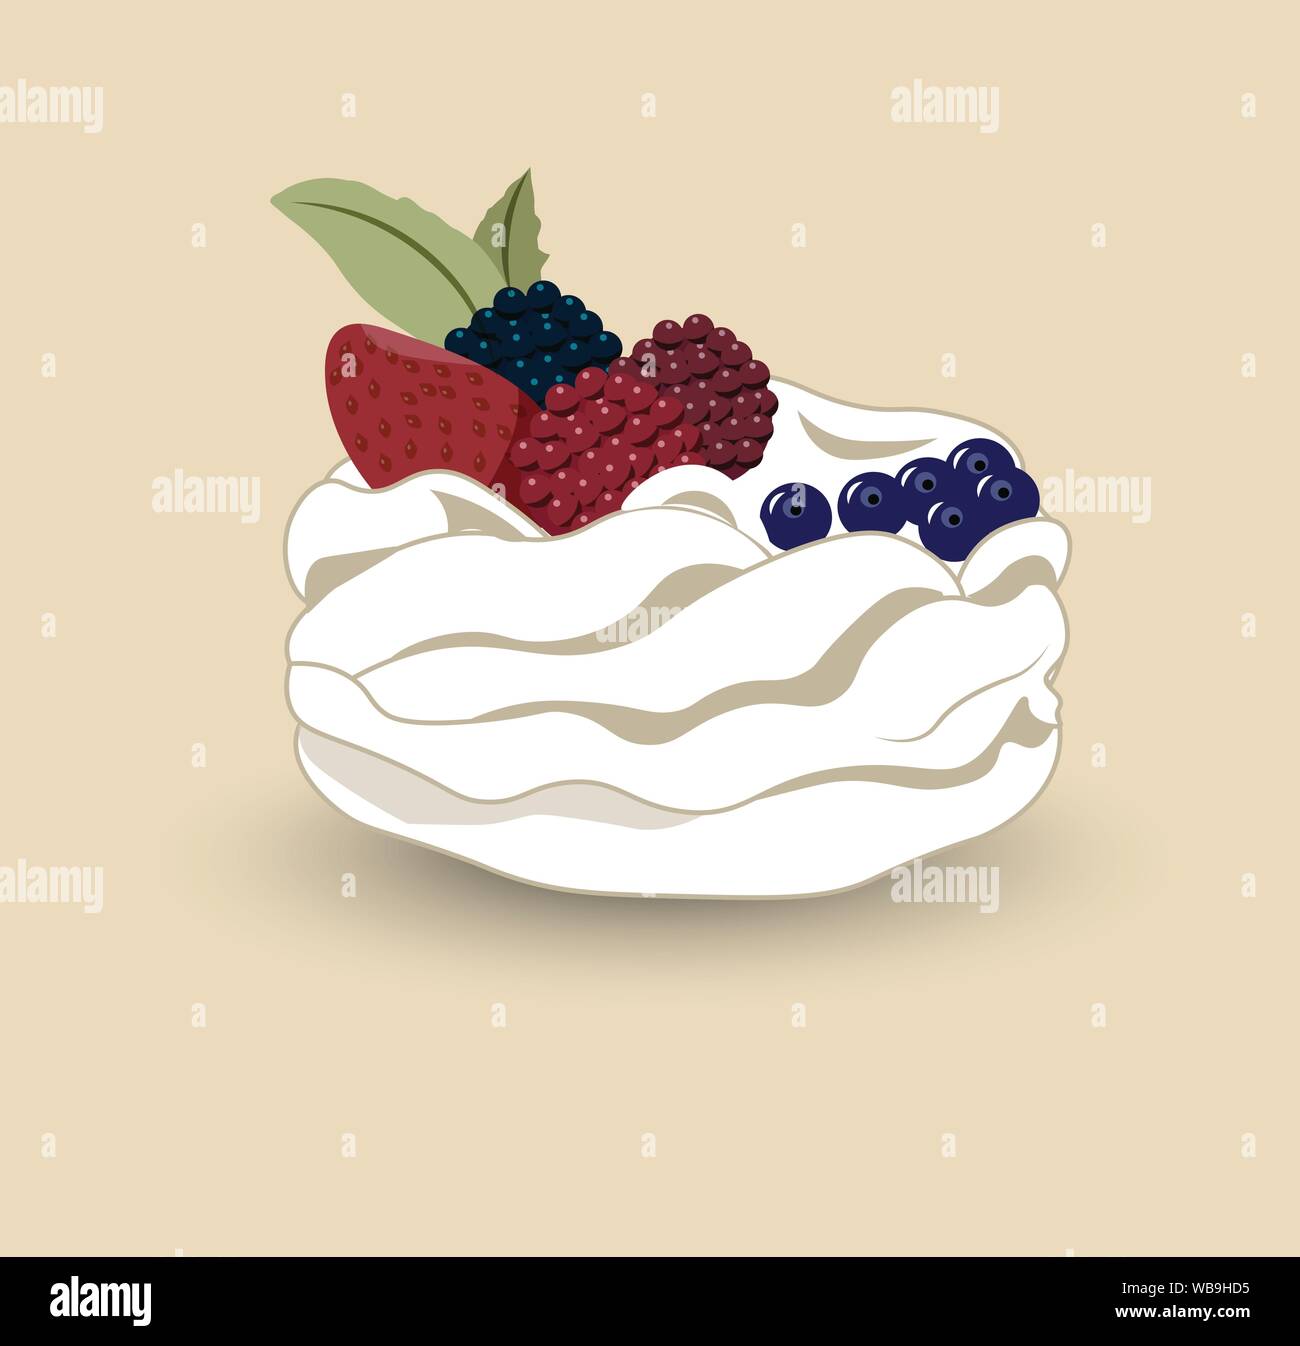 Pavlova is a meringue-based dessert with a fresh berries, named after the Russian ballerina Anna Pavlova. Stock Vector